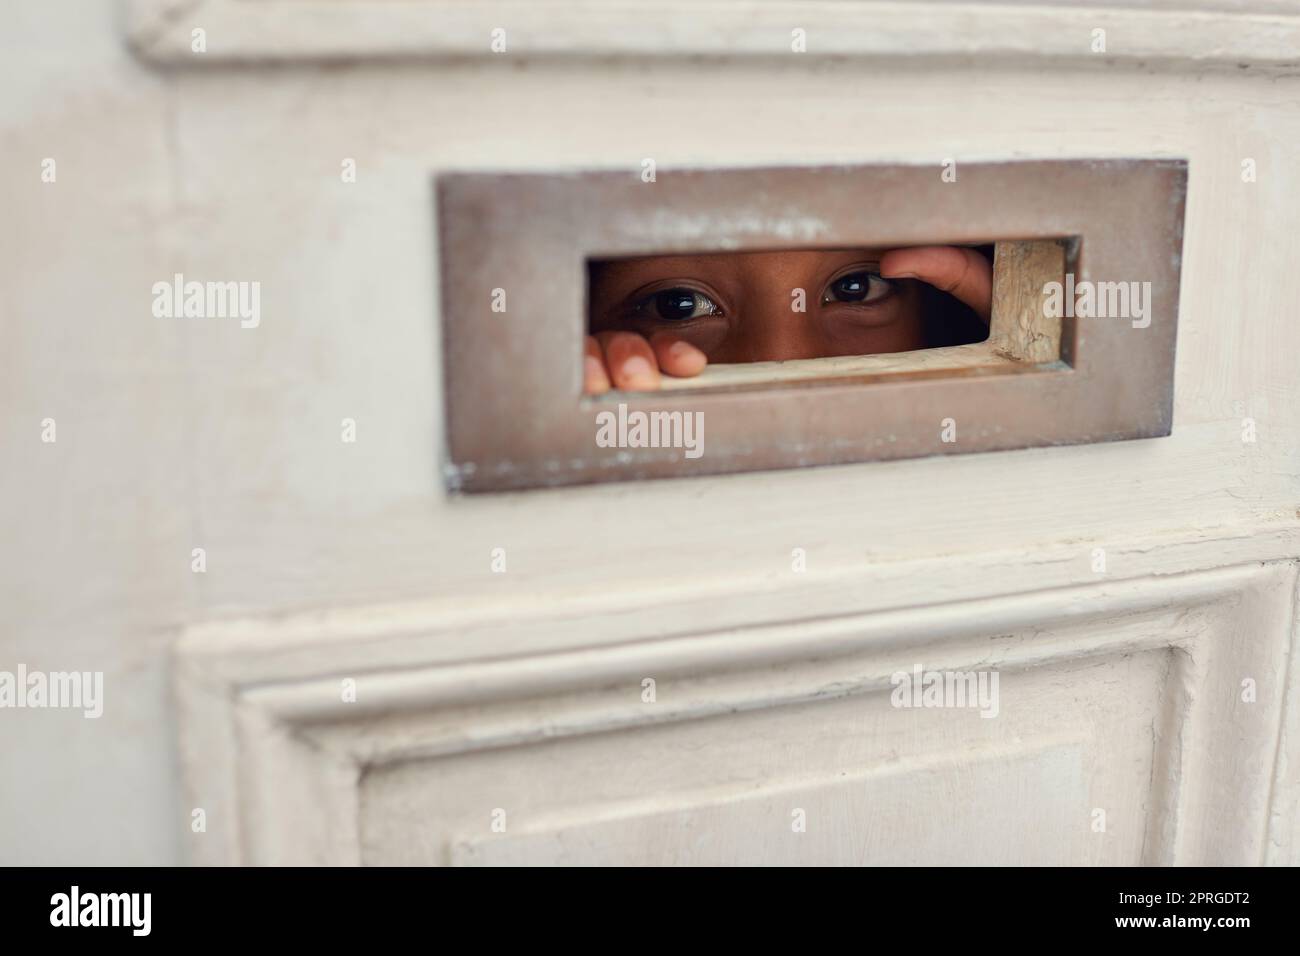 Person kicked out door Stock Photo by ©orlaimagen 62066085